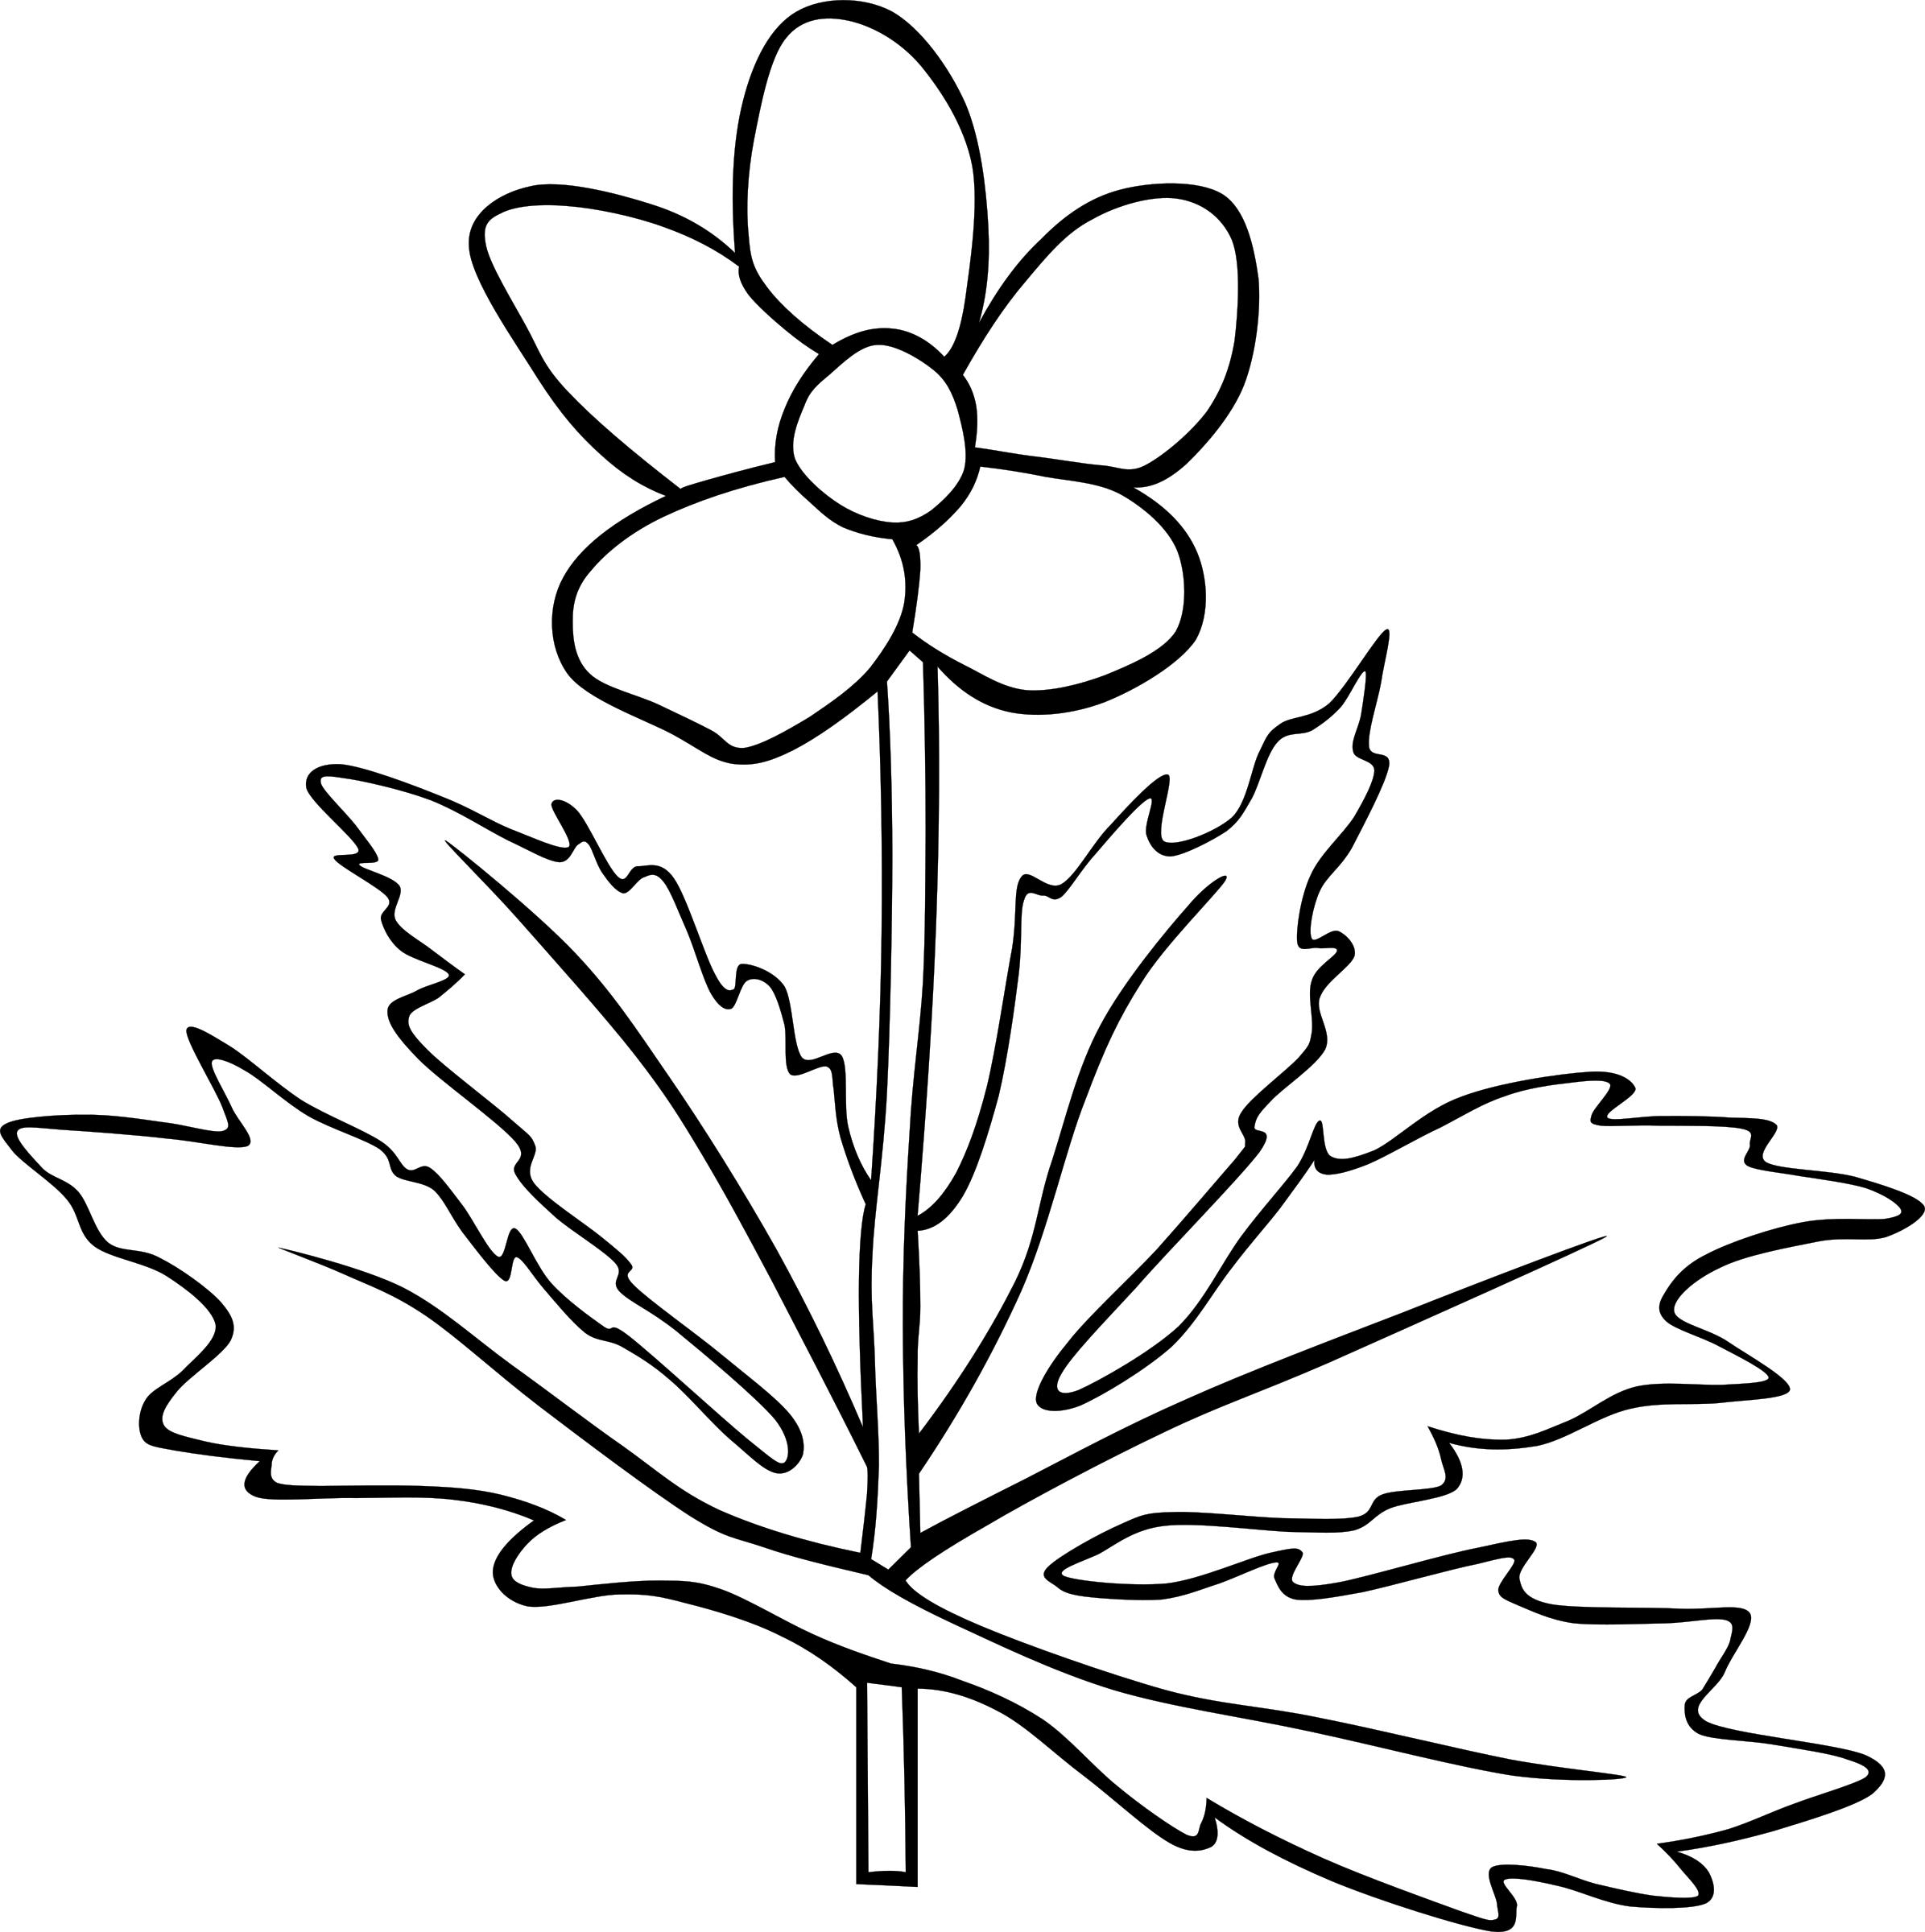 Anemone Canadensis Flower Outline png